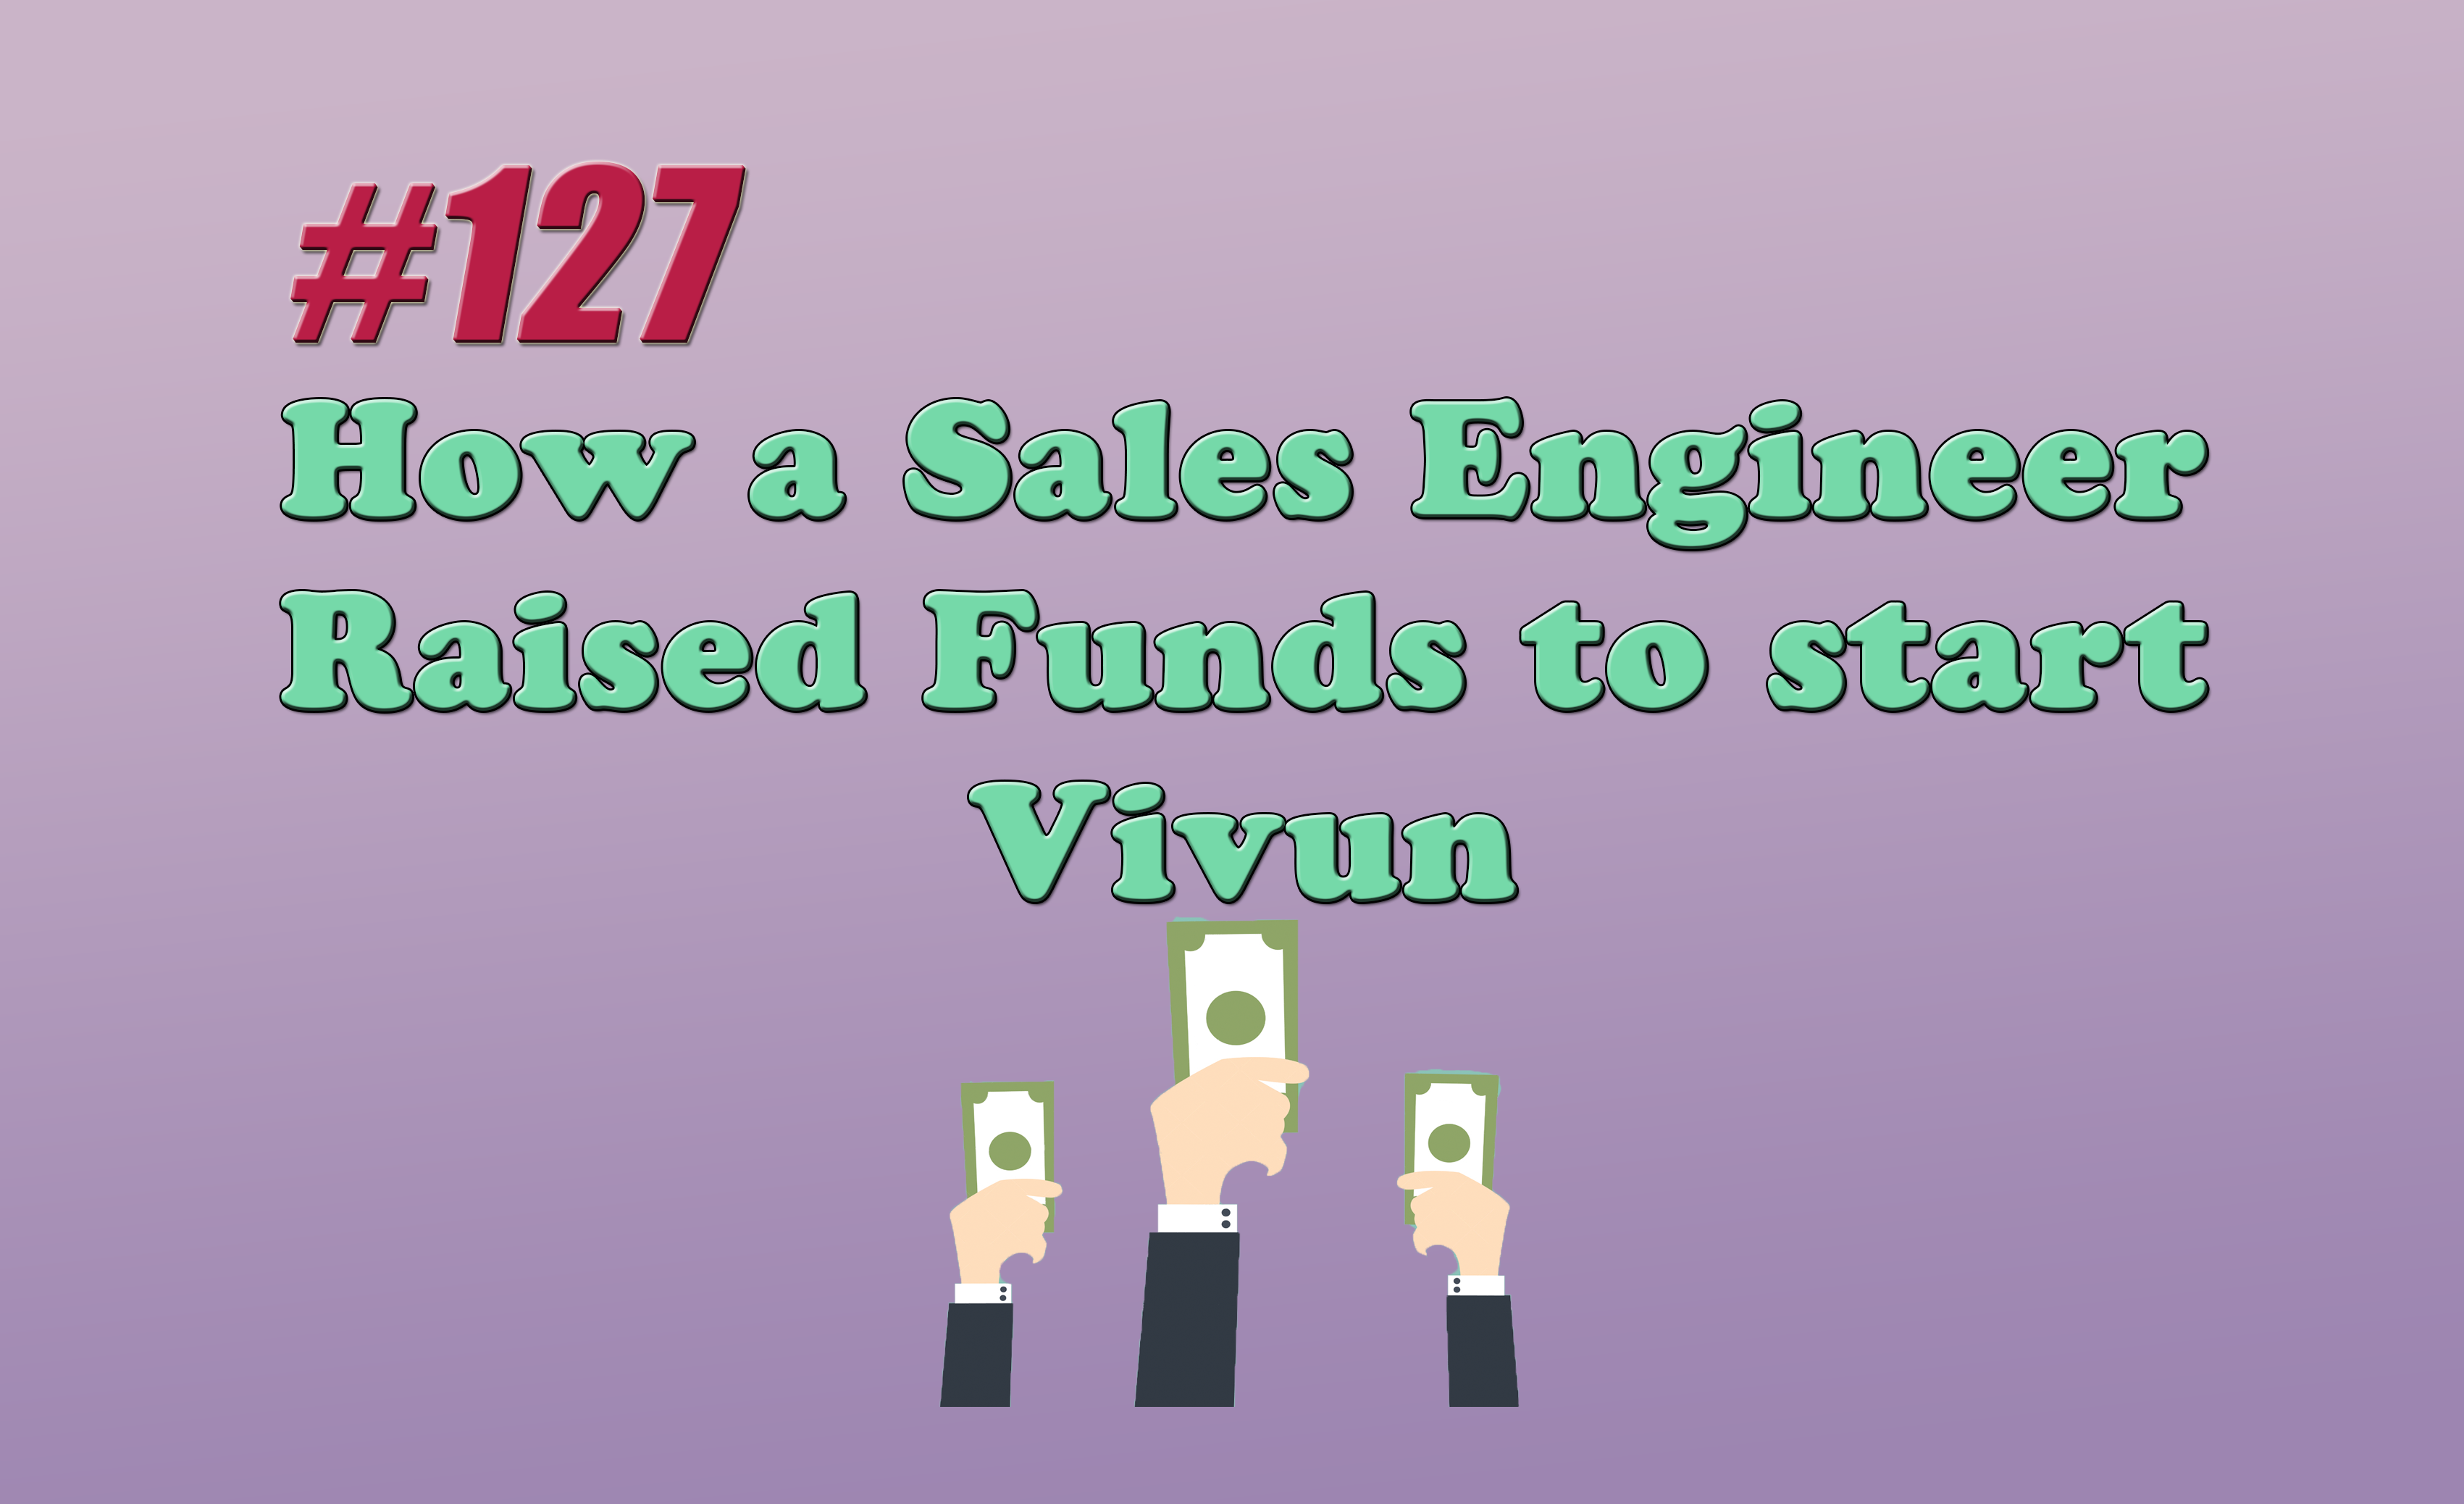 Read more about the article #127 How a Sales Engineer Raised Funds to Start Vivun